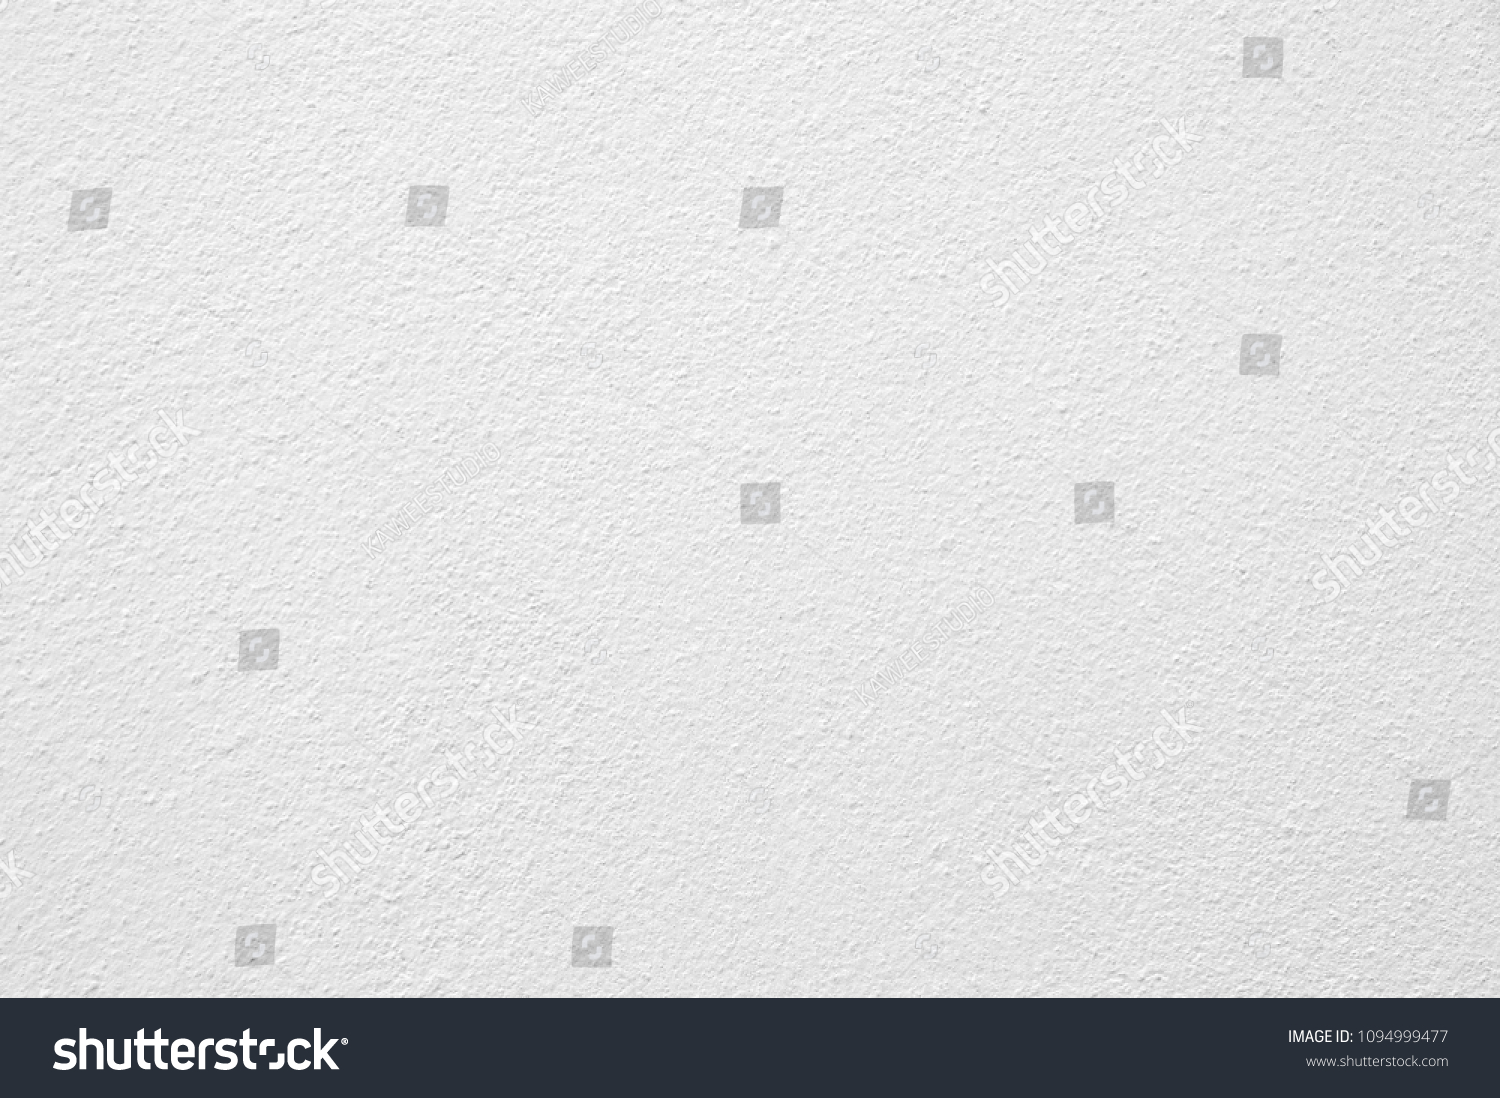 Blank Concrete Wall Texture White Color Stock Photo (Edit Now) 1094999477